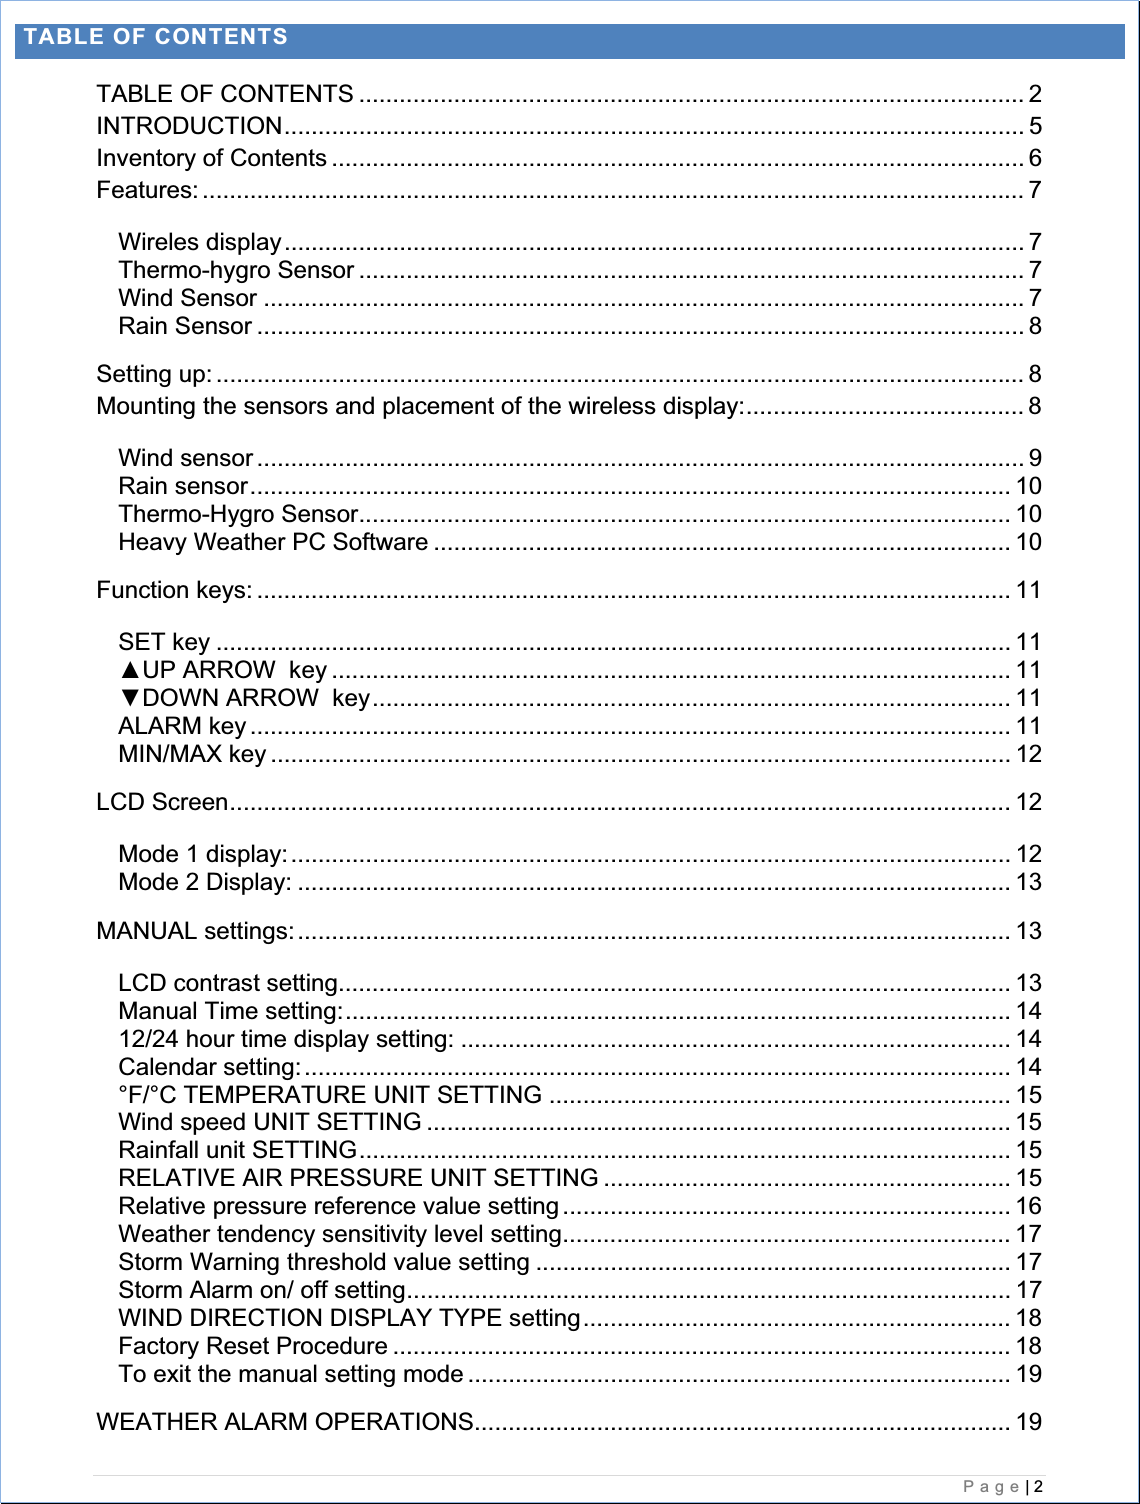    Page| 2  TABLE OF CONTENTS TABLE OF CONTENTS .................................................................................................. 2INTRODUCTION............................................................................................................. 5Inventory of Contents ...................................................................................................... 6Features: ......................................................................................................................... 7Wireles display............................................................................................................. 7Thermo-hygro Sensor .................................................................................................. 7Wind Sensor ................................................................................................................ 7Rain Sensor ................................................................................................................. 8Setting up: ....................................................................................................................... 8Mounting the sensors and placement of the wireless display:......................................... 8Wind sensor ................................................................................................................. 9Rain sensor................................................................................................................ 10Thermo-Hygro Sensor................................................................................................ 10Heavy Weather PC Software ..................................................................................... 10Function keys: ............................................................................................................... 11SET key ..................................................................................................................... 11ŸUP ARROW  key .................................................................................................... 11źDOWN ARROW  key.............................................................................................. 11ALARM key ................................................................................................................ 11MIN/MAX key ............................................................................................................. 12LCD Screen................................................................................................................... 12Mode 1 display:.......................................................................................................... 12Mode 2 Display: ......................................................................................................... 13MANUAL settings:......................................................................................................... 13LCD contrast setting................................................................................................... 13Manual Time setting:.................................................................................................. 1412/24 hour time display setting: ................................................................................. 14Calendar setting:........................................................................................................ 14°F/°C TEMPERATURE UNIT SETTING .................................................................... 15Wind speed UNIT SETTING ...................................................................................... 15Rainfall unit SETTING................................................................................................ 15RELATIVE AIR PRESSURE UNIT SETTING ............................................................ 15Relative pressure reference value setting .................................................................. 16Weather tendency sensitivity level setting.................................................................. 17Storm Warning threshold value setting ...................................................................... 17Storm Alarm on/ off setting......................................................................................... 17WIND DIRECTION DISPLAY TYPE setting............................................................... 18Factory Reset Procedure ........................................................................................... 18To exit the manual setting mode ................................................................................ 19WEATHER ALARM OPERATIONS............................................................................... 19